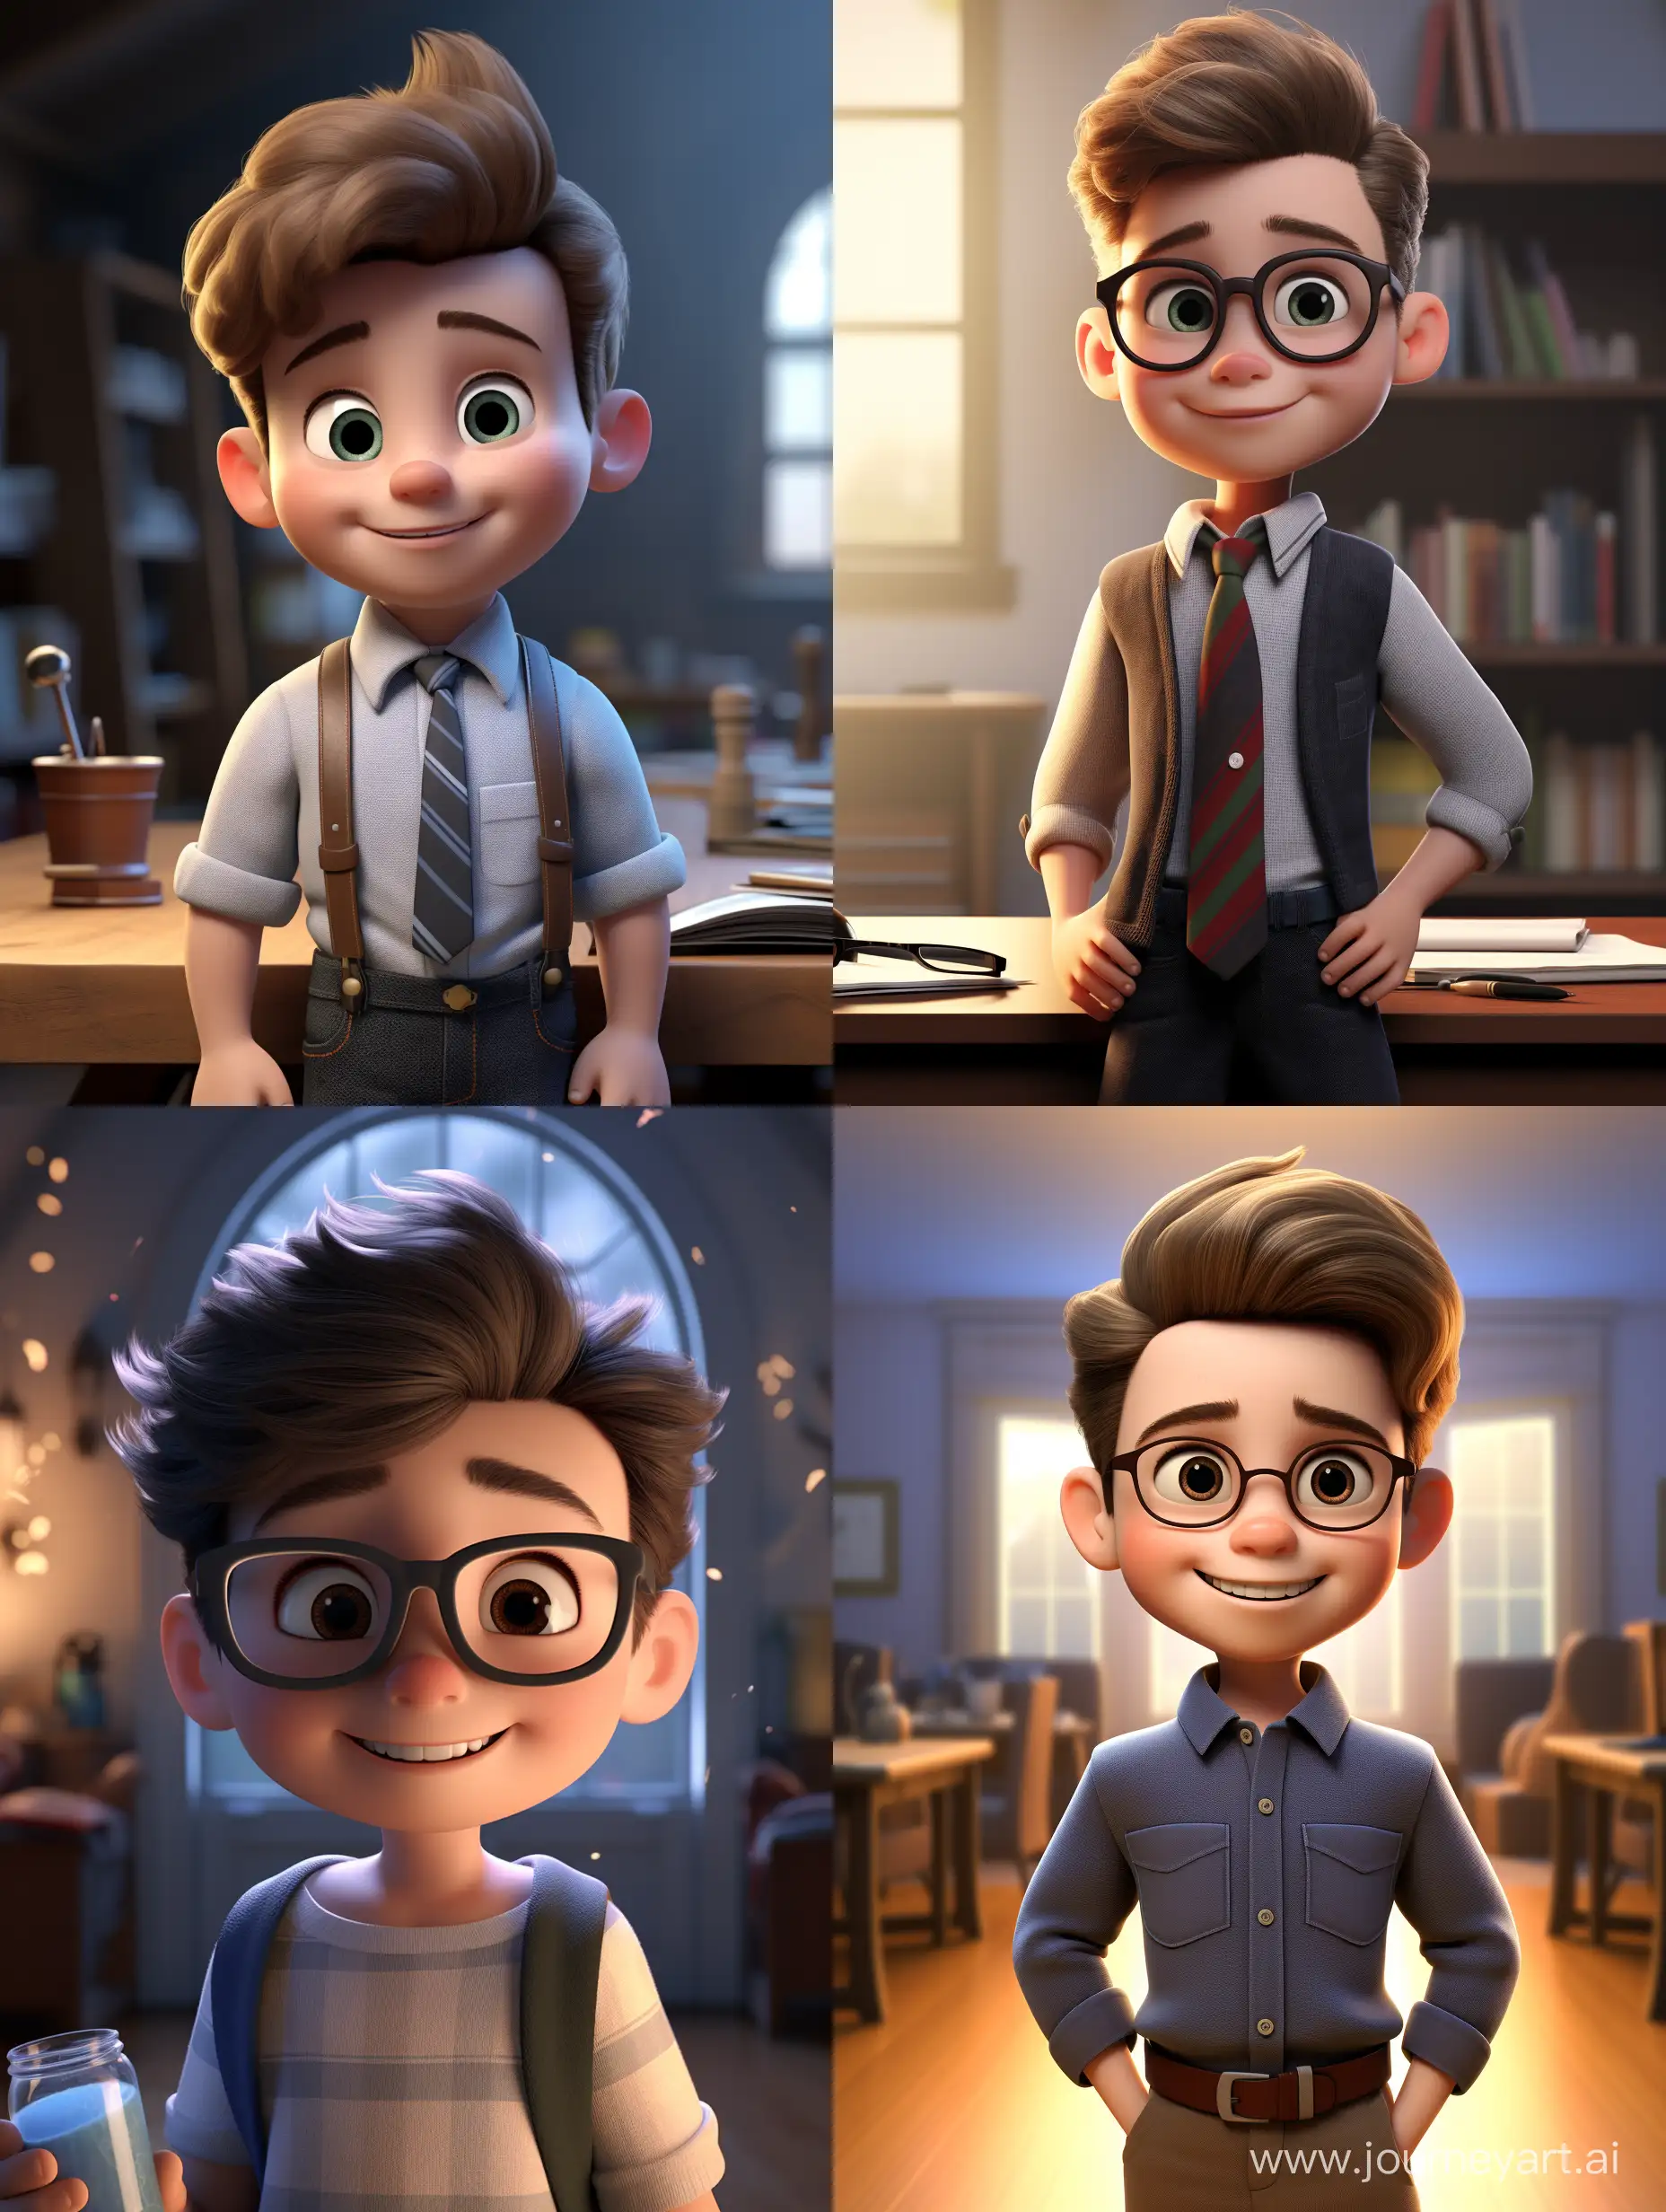 Creative-Smiling-Boy-in-Pixarstyle-3D-Animation